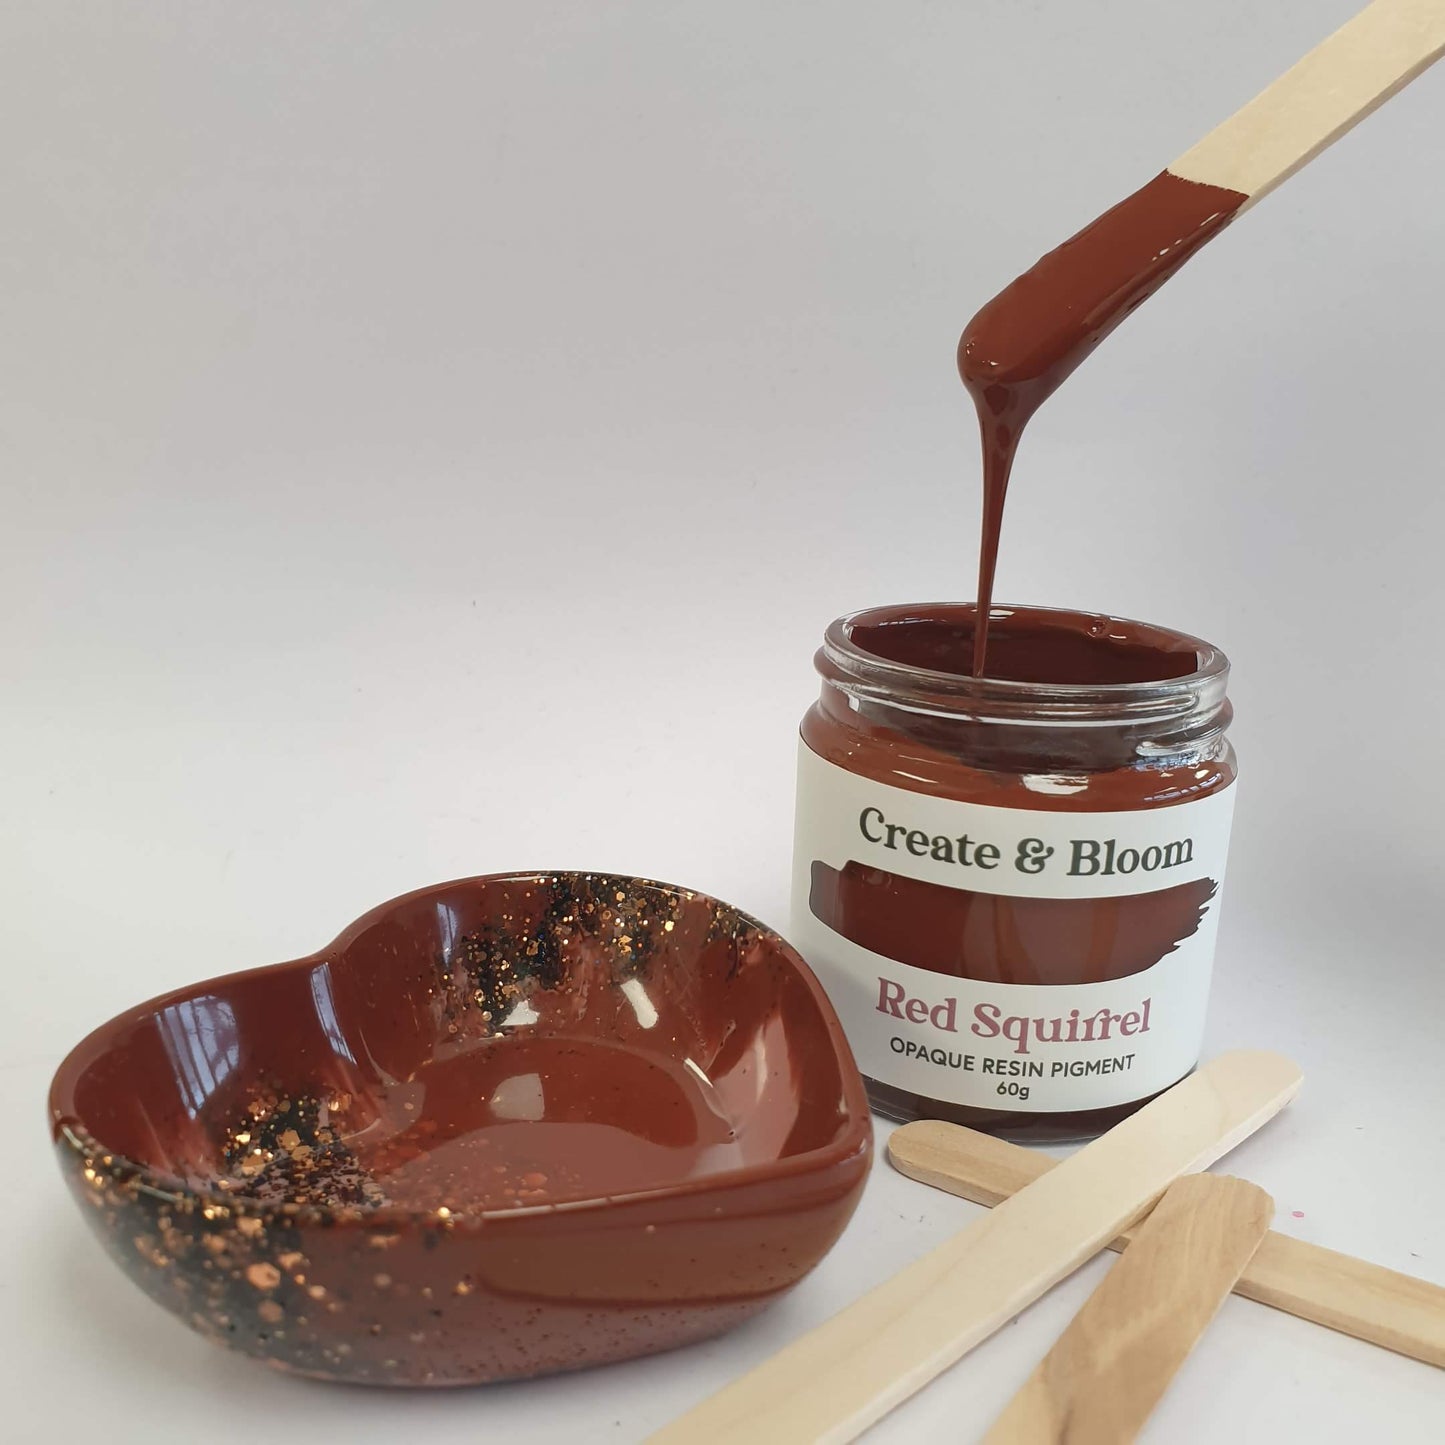 Opaque Resin Pigment: Red Squirrel Brown